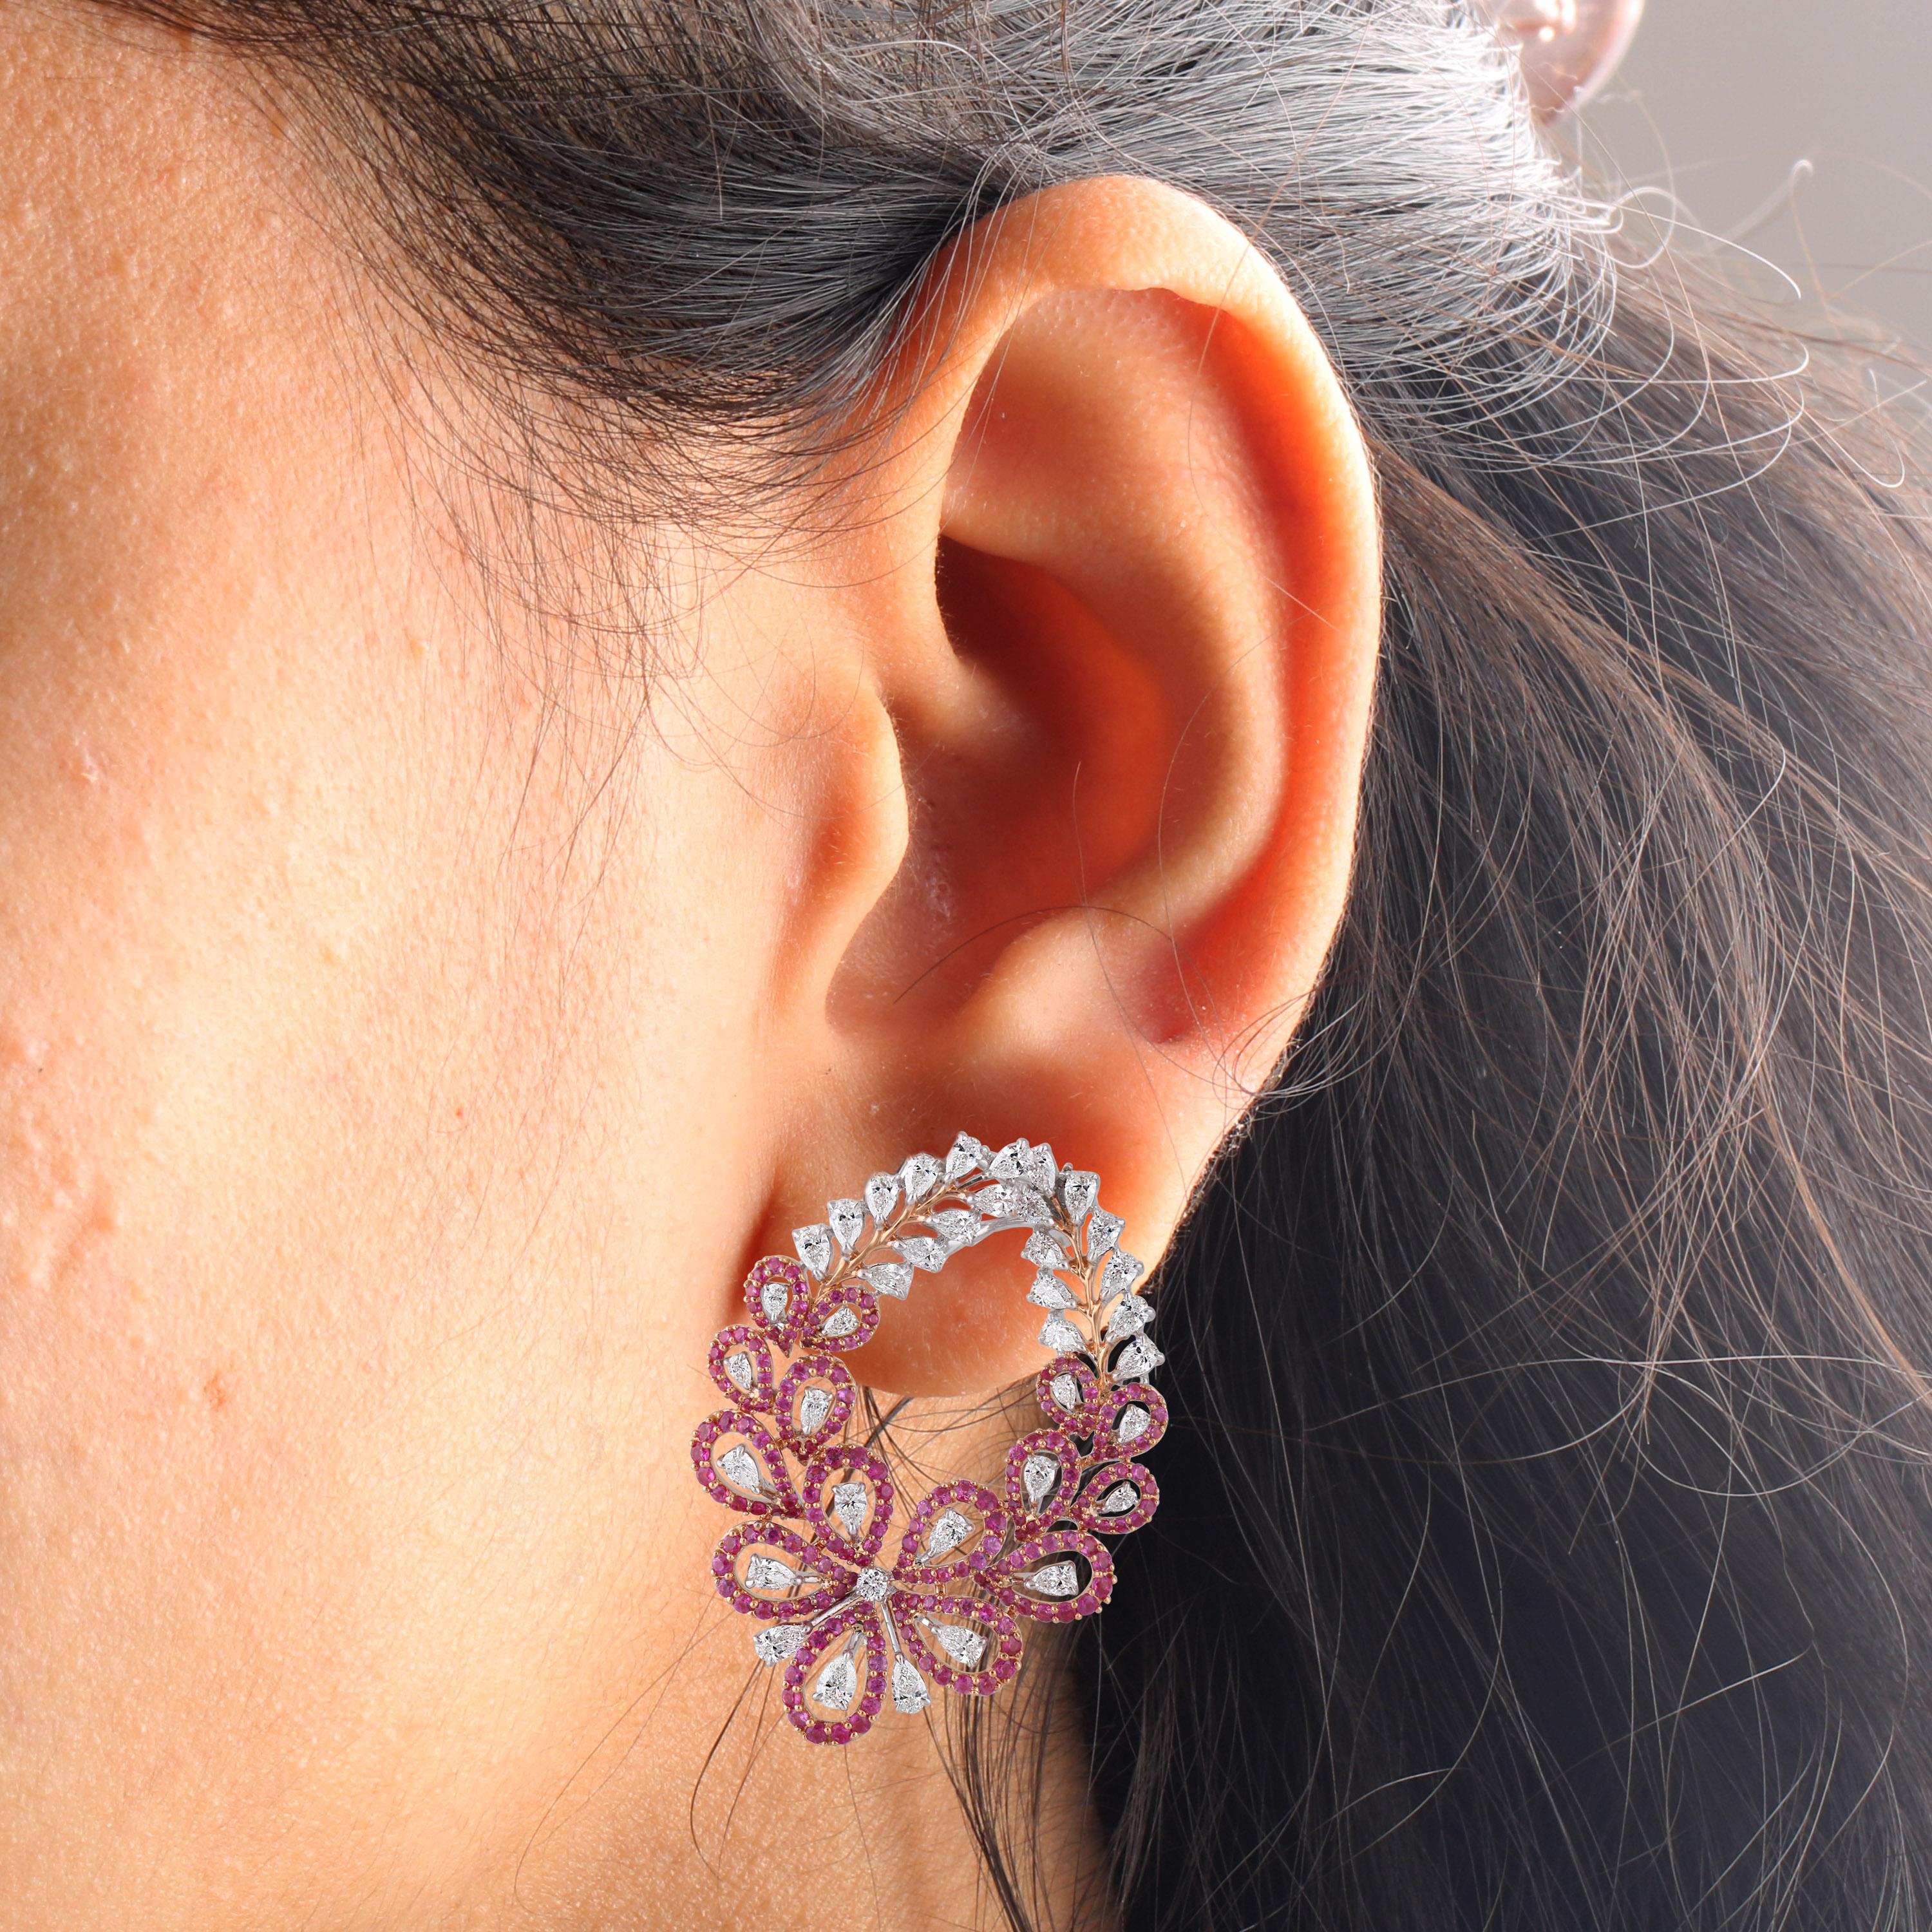 Gross Weight: 28.35 gms
Diamond Weight: 4.79 cts
Pink Sapphire Weight: 4.50 cts
IGI Certified

Video of the product can be shared on request.

18 karat white and rose gold brings out the sparkle of diamonds and pink sapphires in these stud earrings.